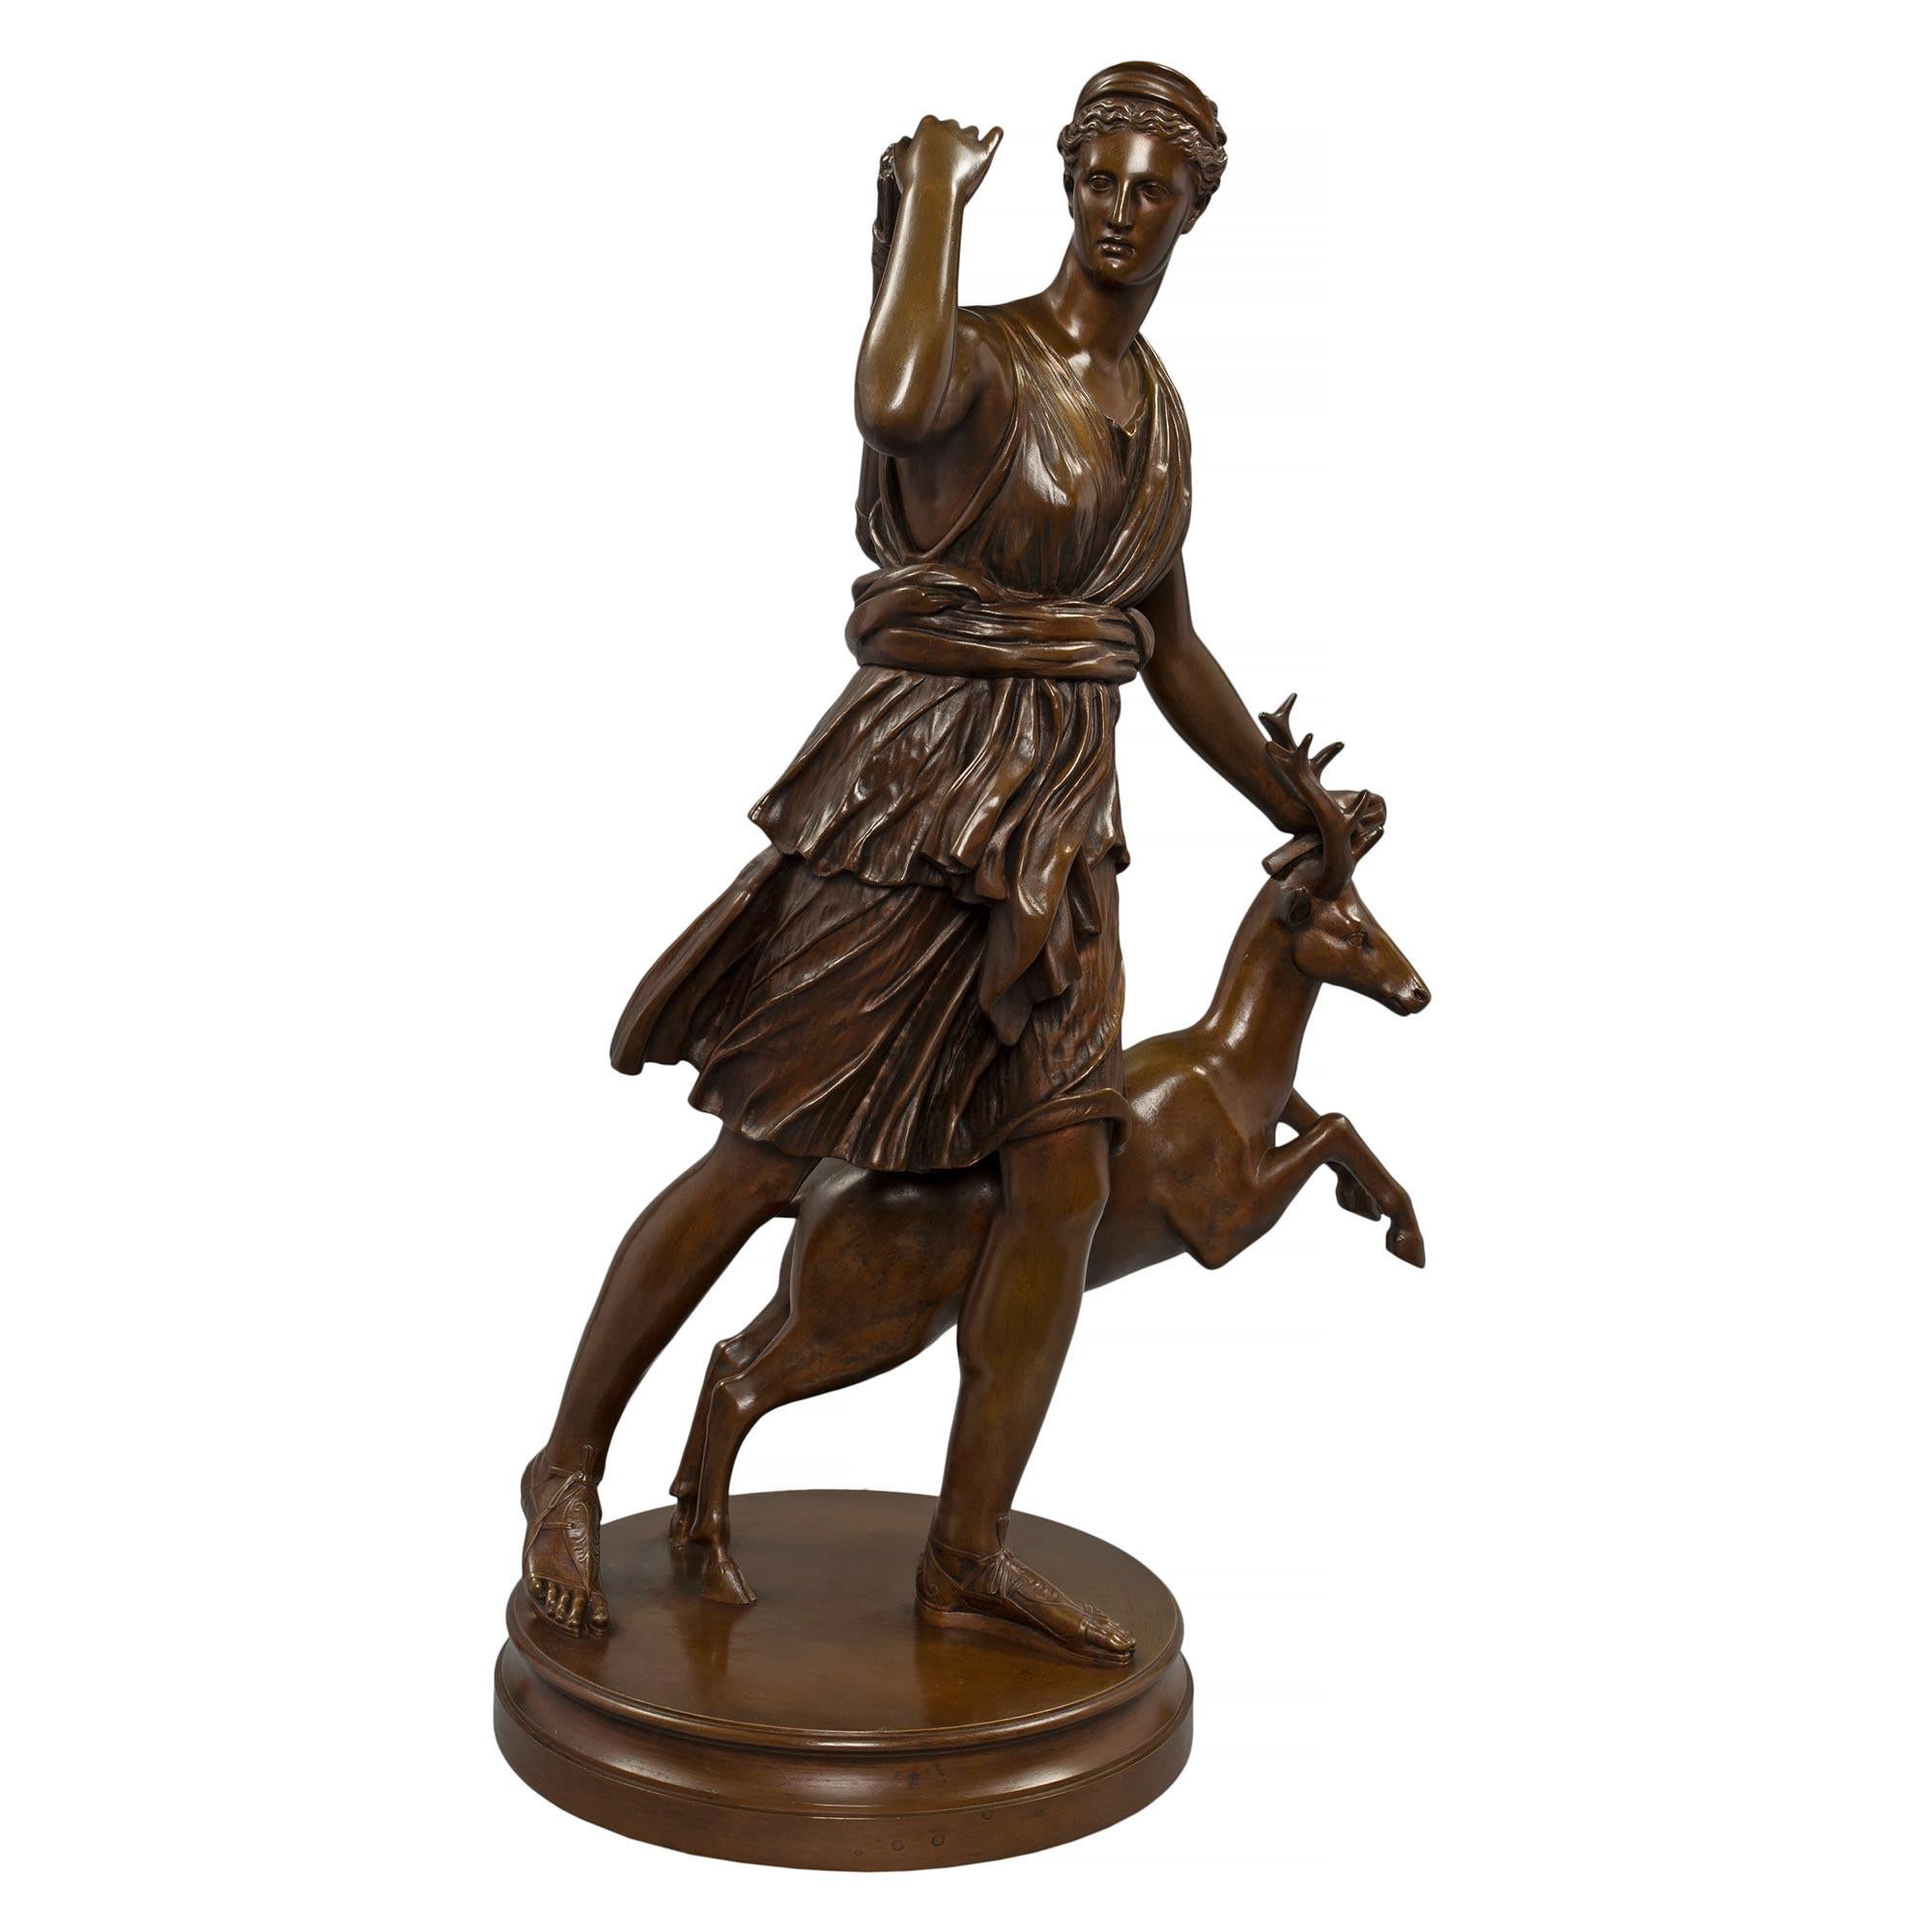 A sensational and large scale French mid 19th century Louis XVI st. patinated bronze statue of Diana the Huntress, signed by Barbedienne. Diana dressed in classical attire and is reaching behind her shoulder to get a bow out her quiver.Her other